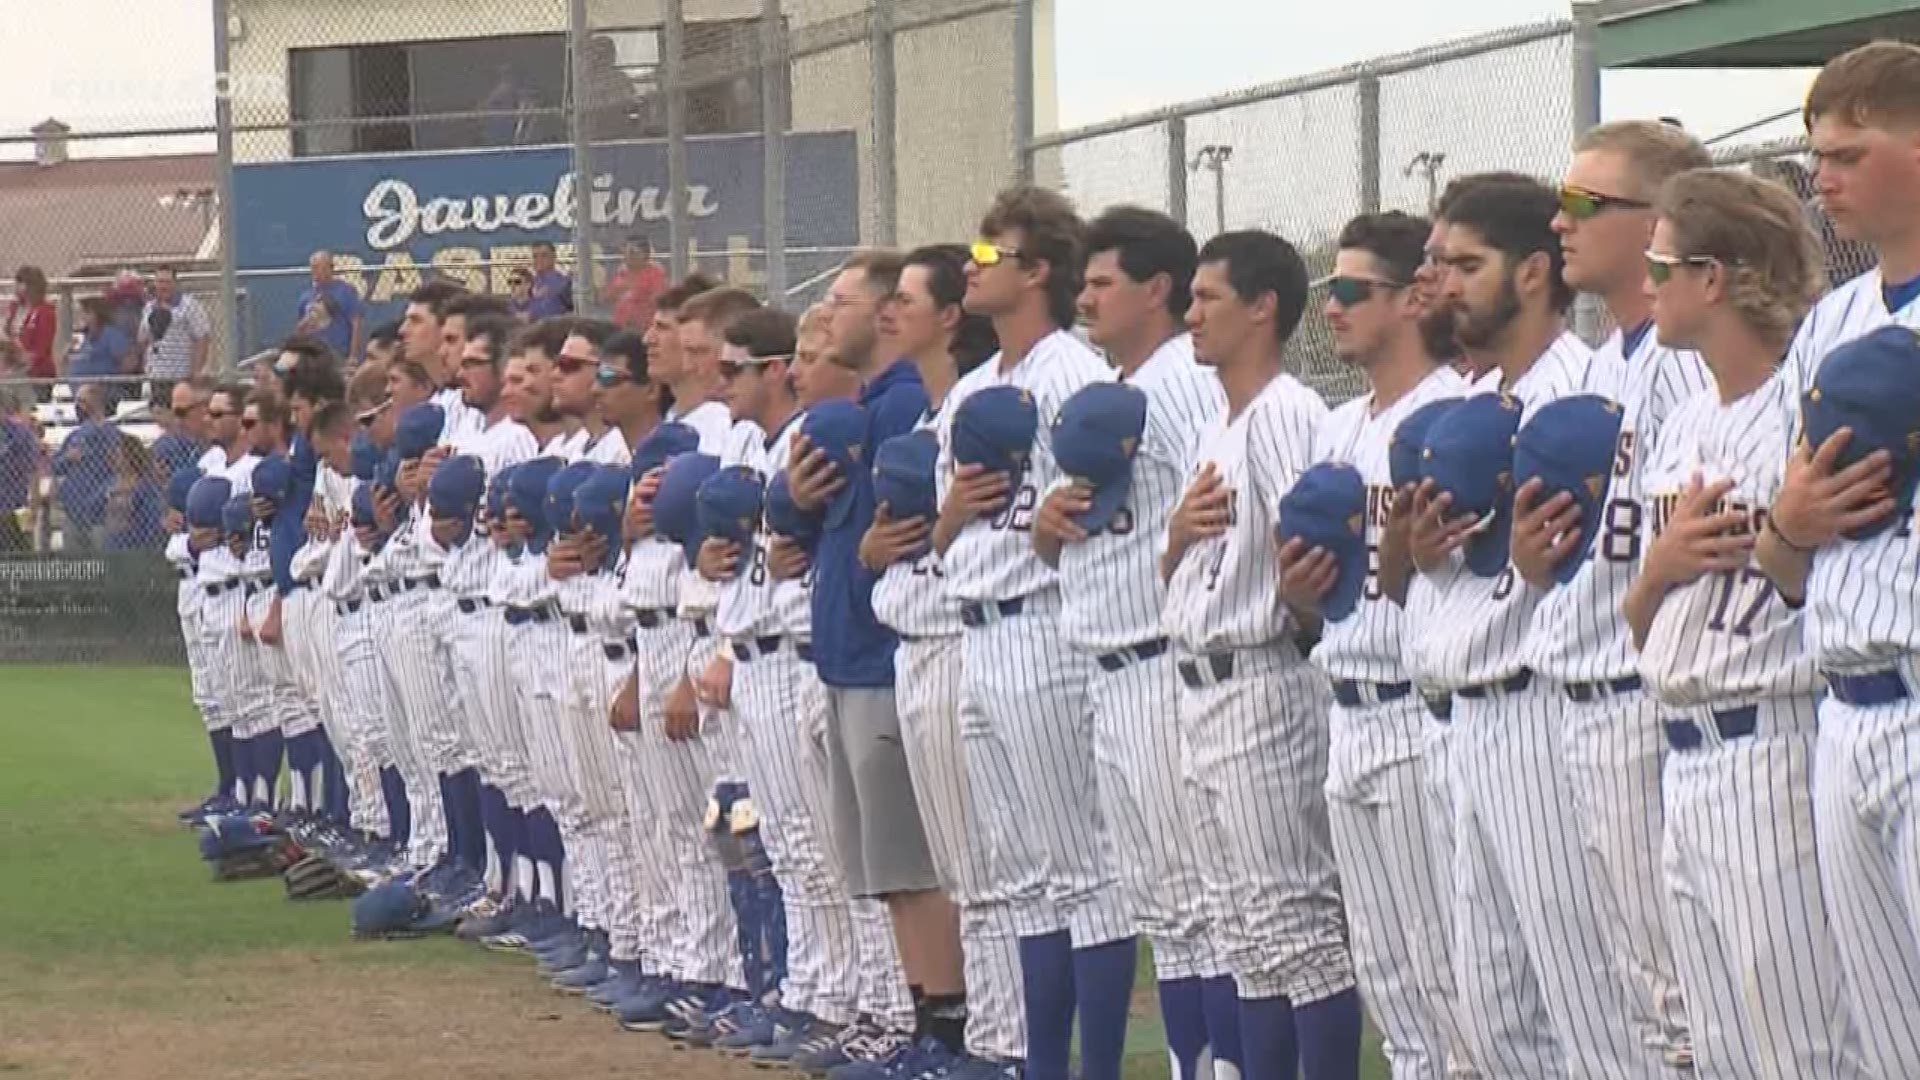 Texas A&M-Kingsville baseball picked up it's 2nd Lone Star Conference win over No. 5 West Texas A&M.